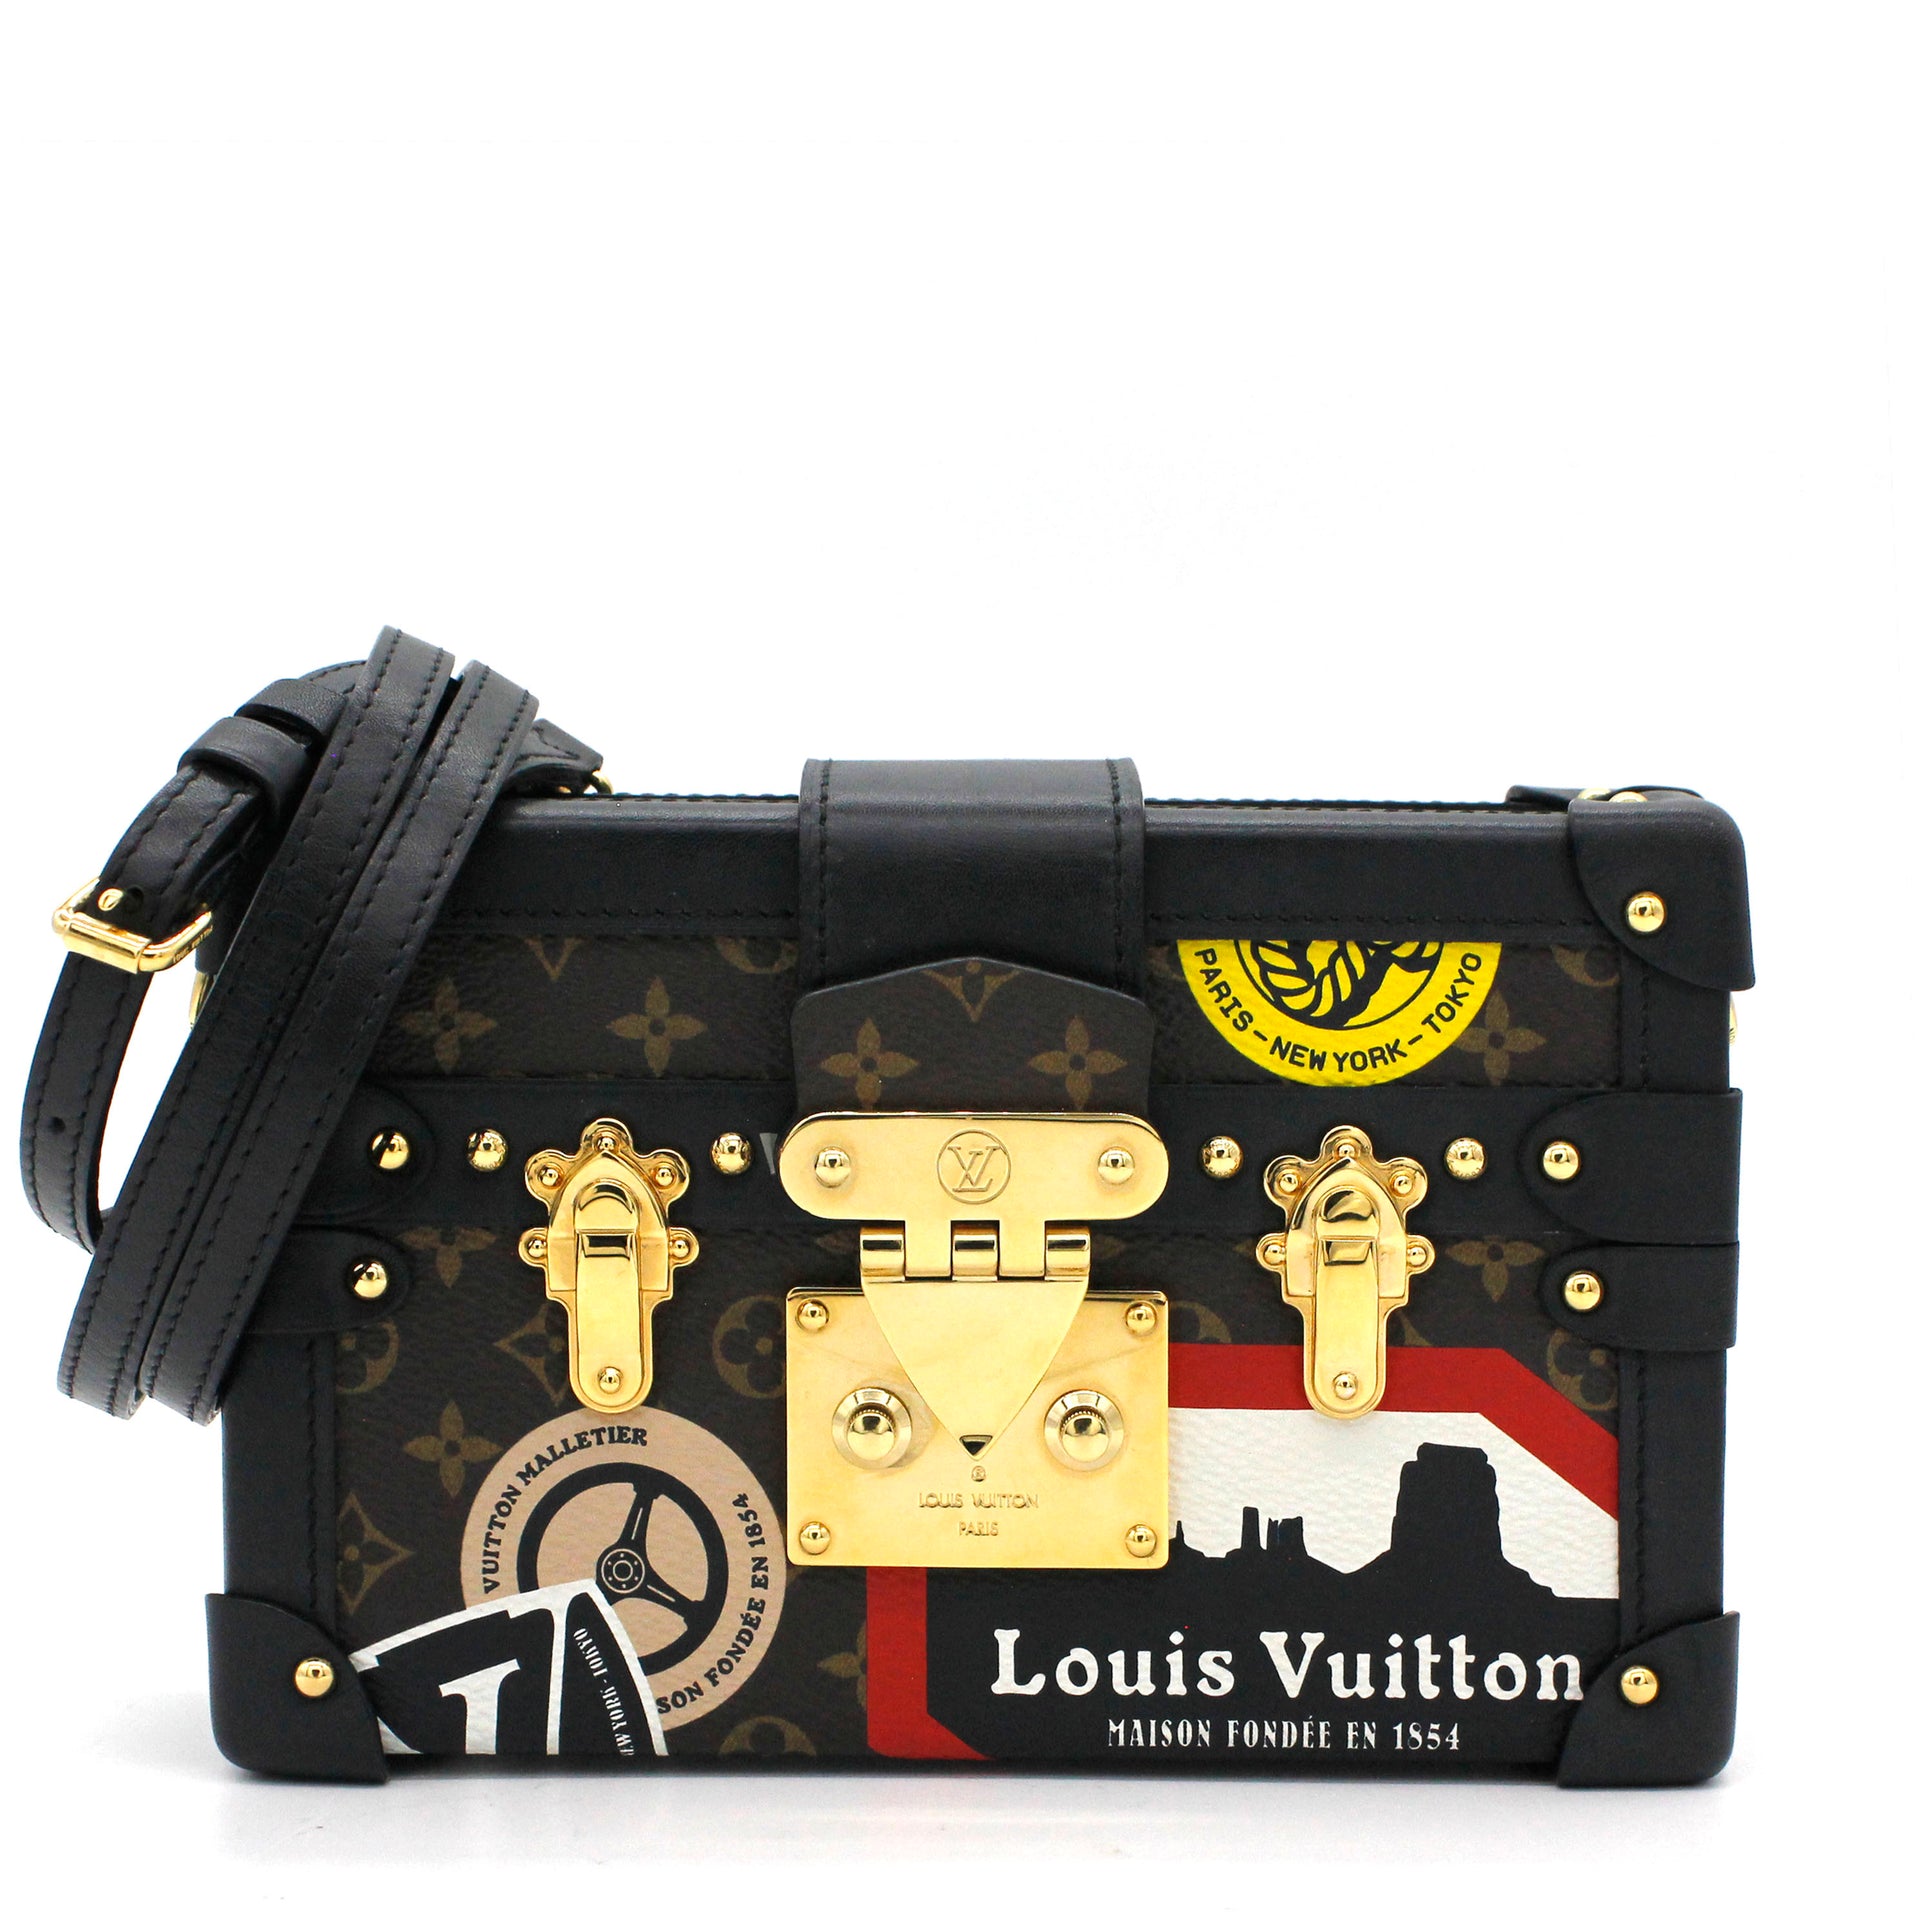 Louis Vuitton Just Turned Its Petit Malle Bag Into A Phone Case